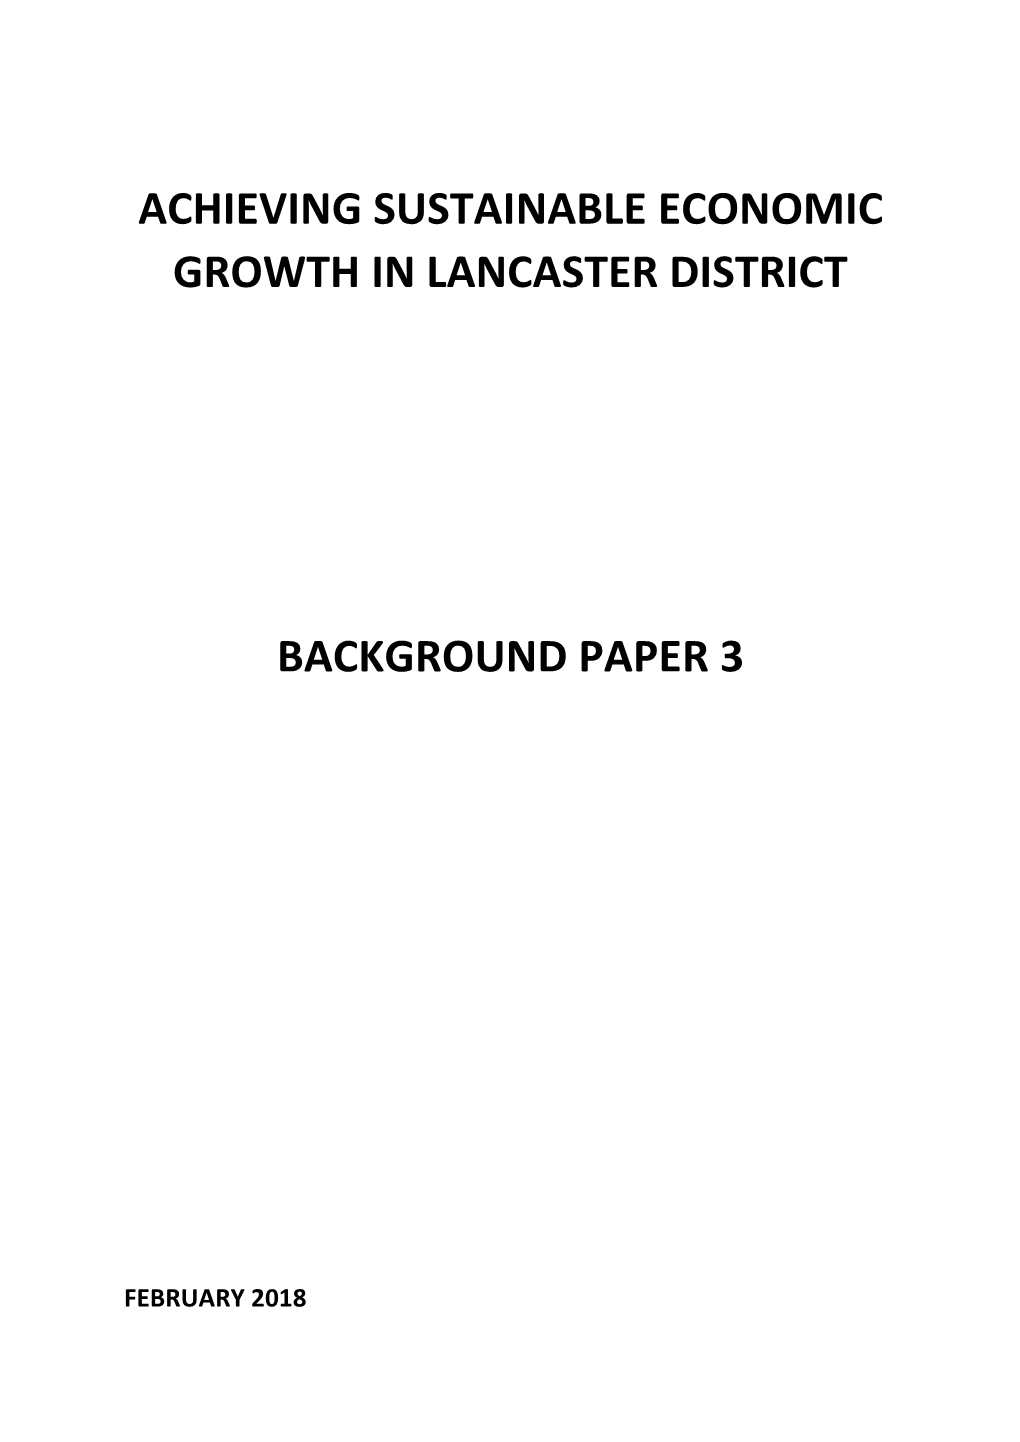 Achieving Sustainable Economic Growth in Lancaster District Background Paper 3